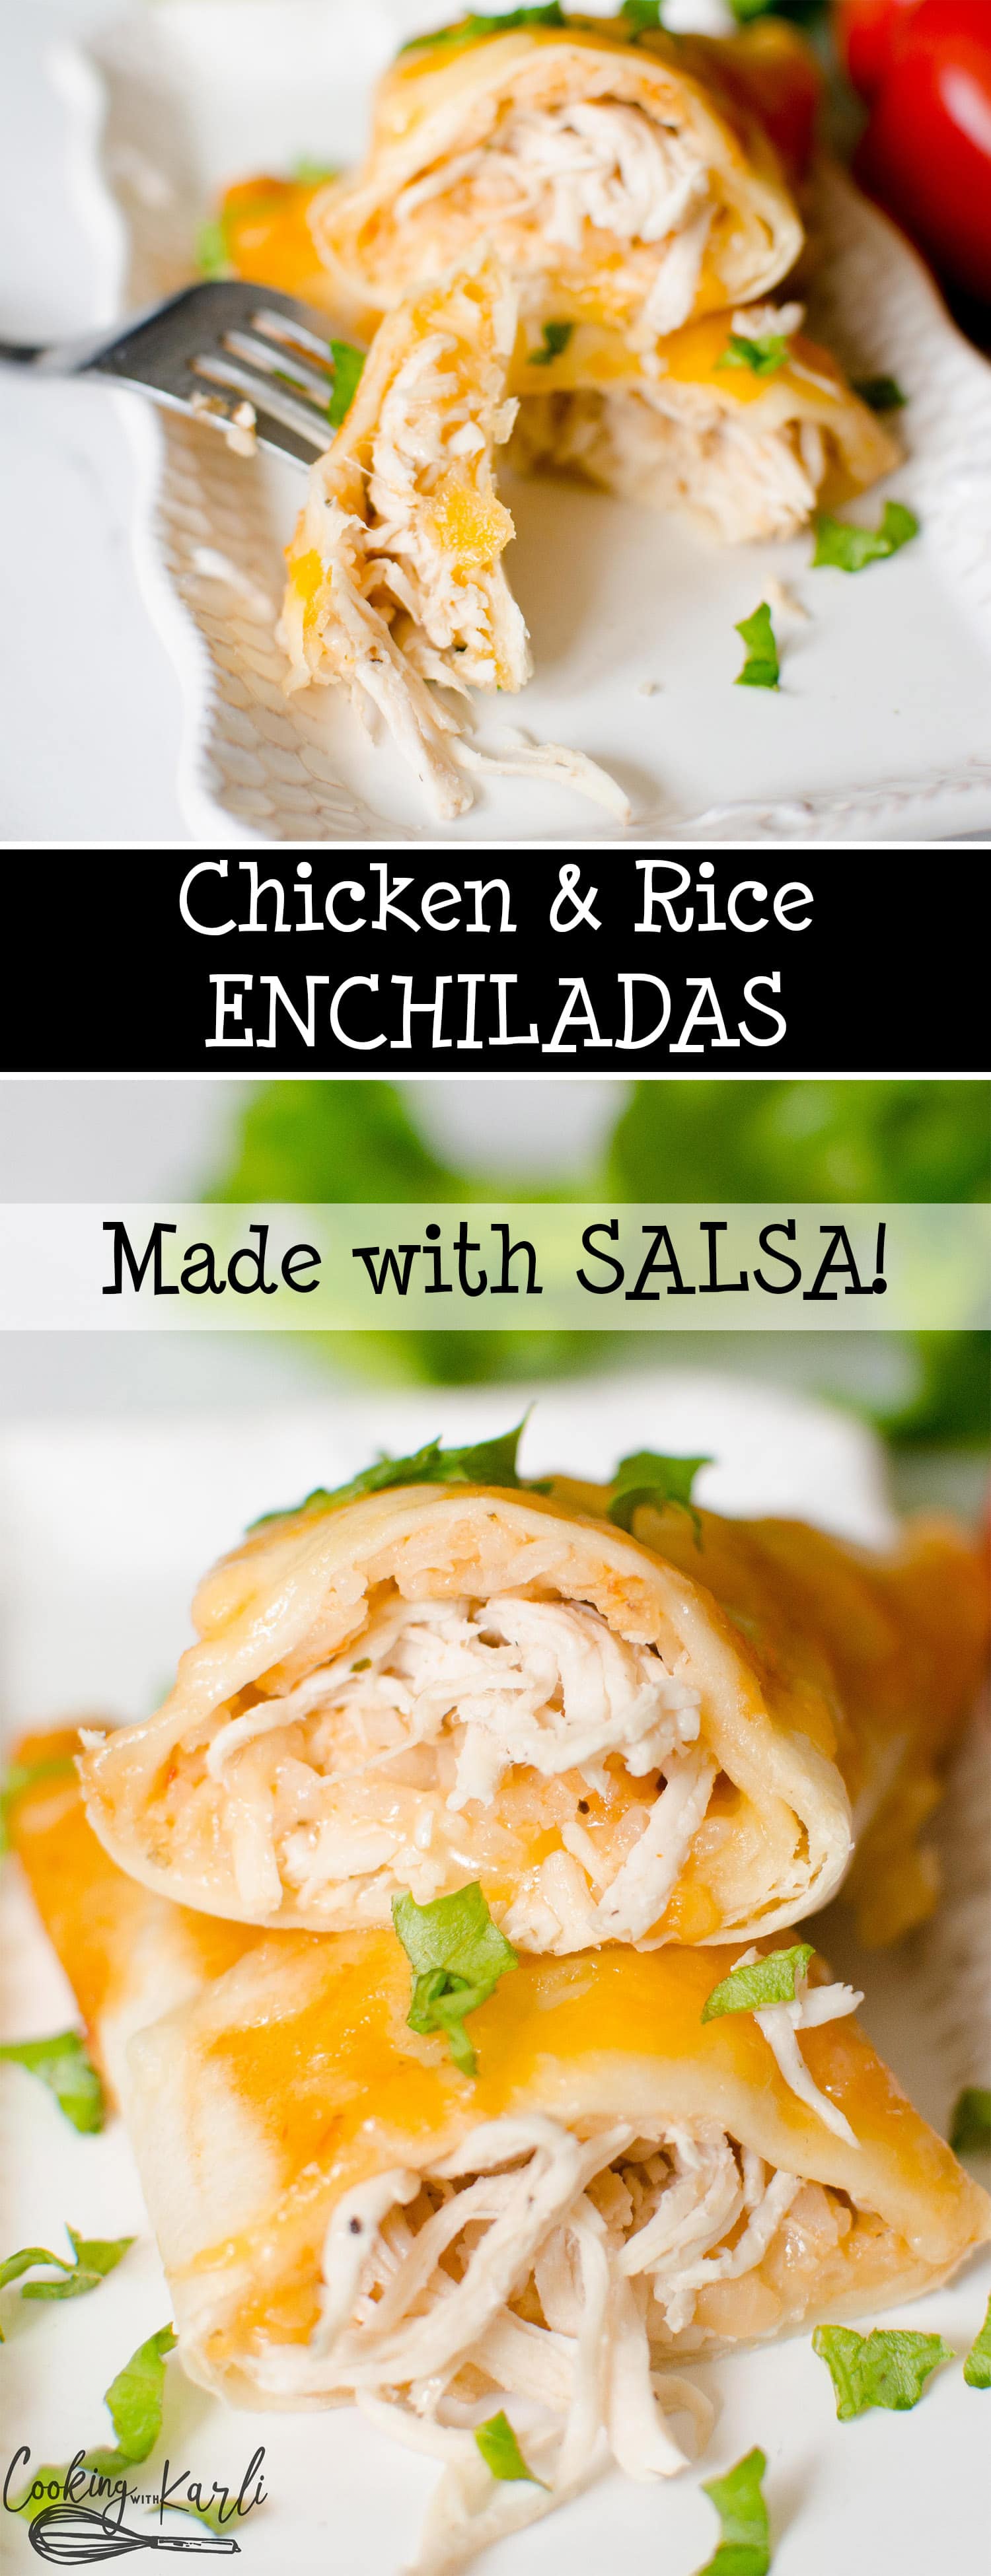 Chicken and Rice Enchiladas are simple and easy to make. The from scratch sauce is mild and definitely kid-friendly. Rotisserie Chicken and Minute Rice allow this meal to be on the table in less than 30 minutes. |Cooking with Karli| #chicken #rice #enchilada #30minutemeal #kidfriendly #recipe 